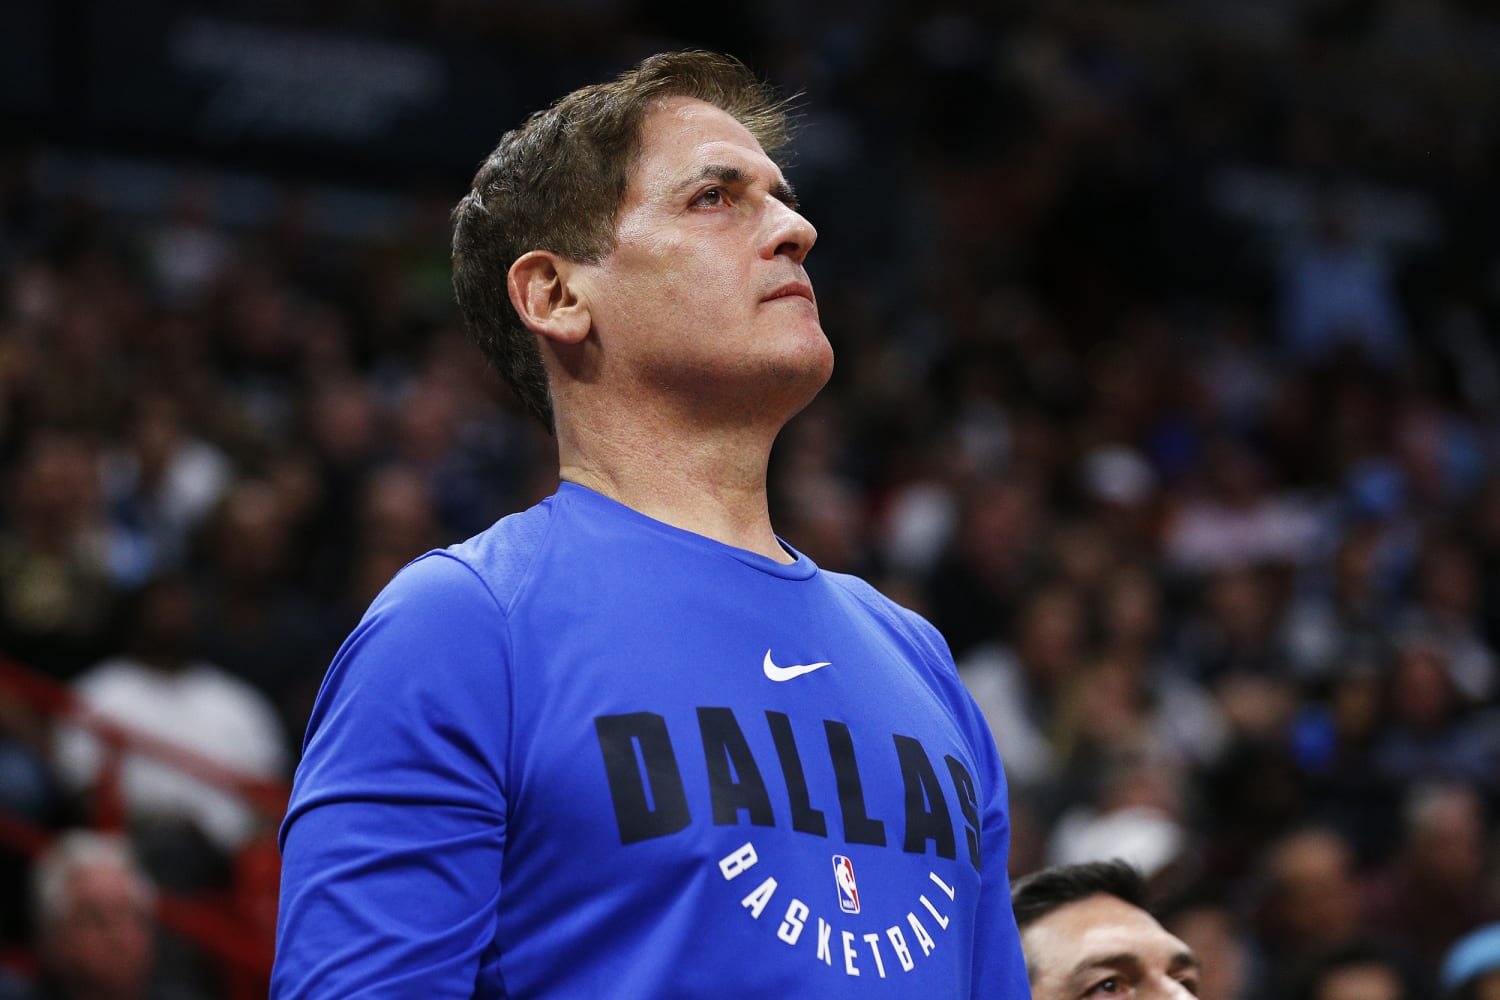 Mark Cuban buys entire, empty town of Mustang, Texas